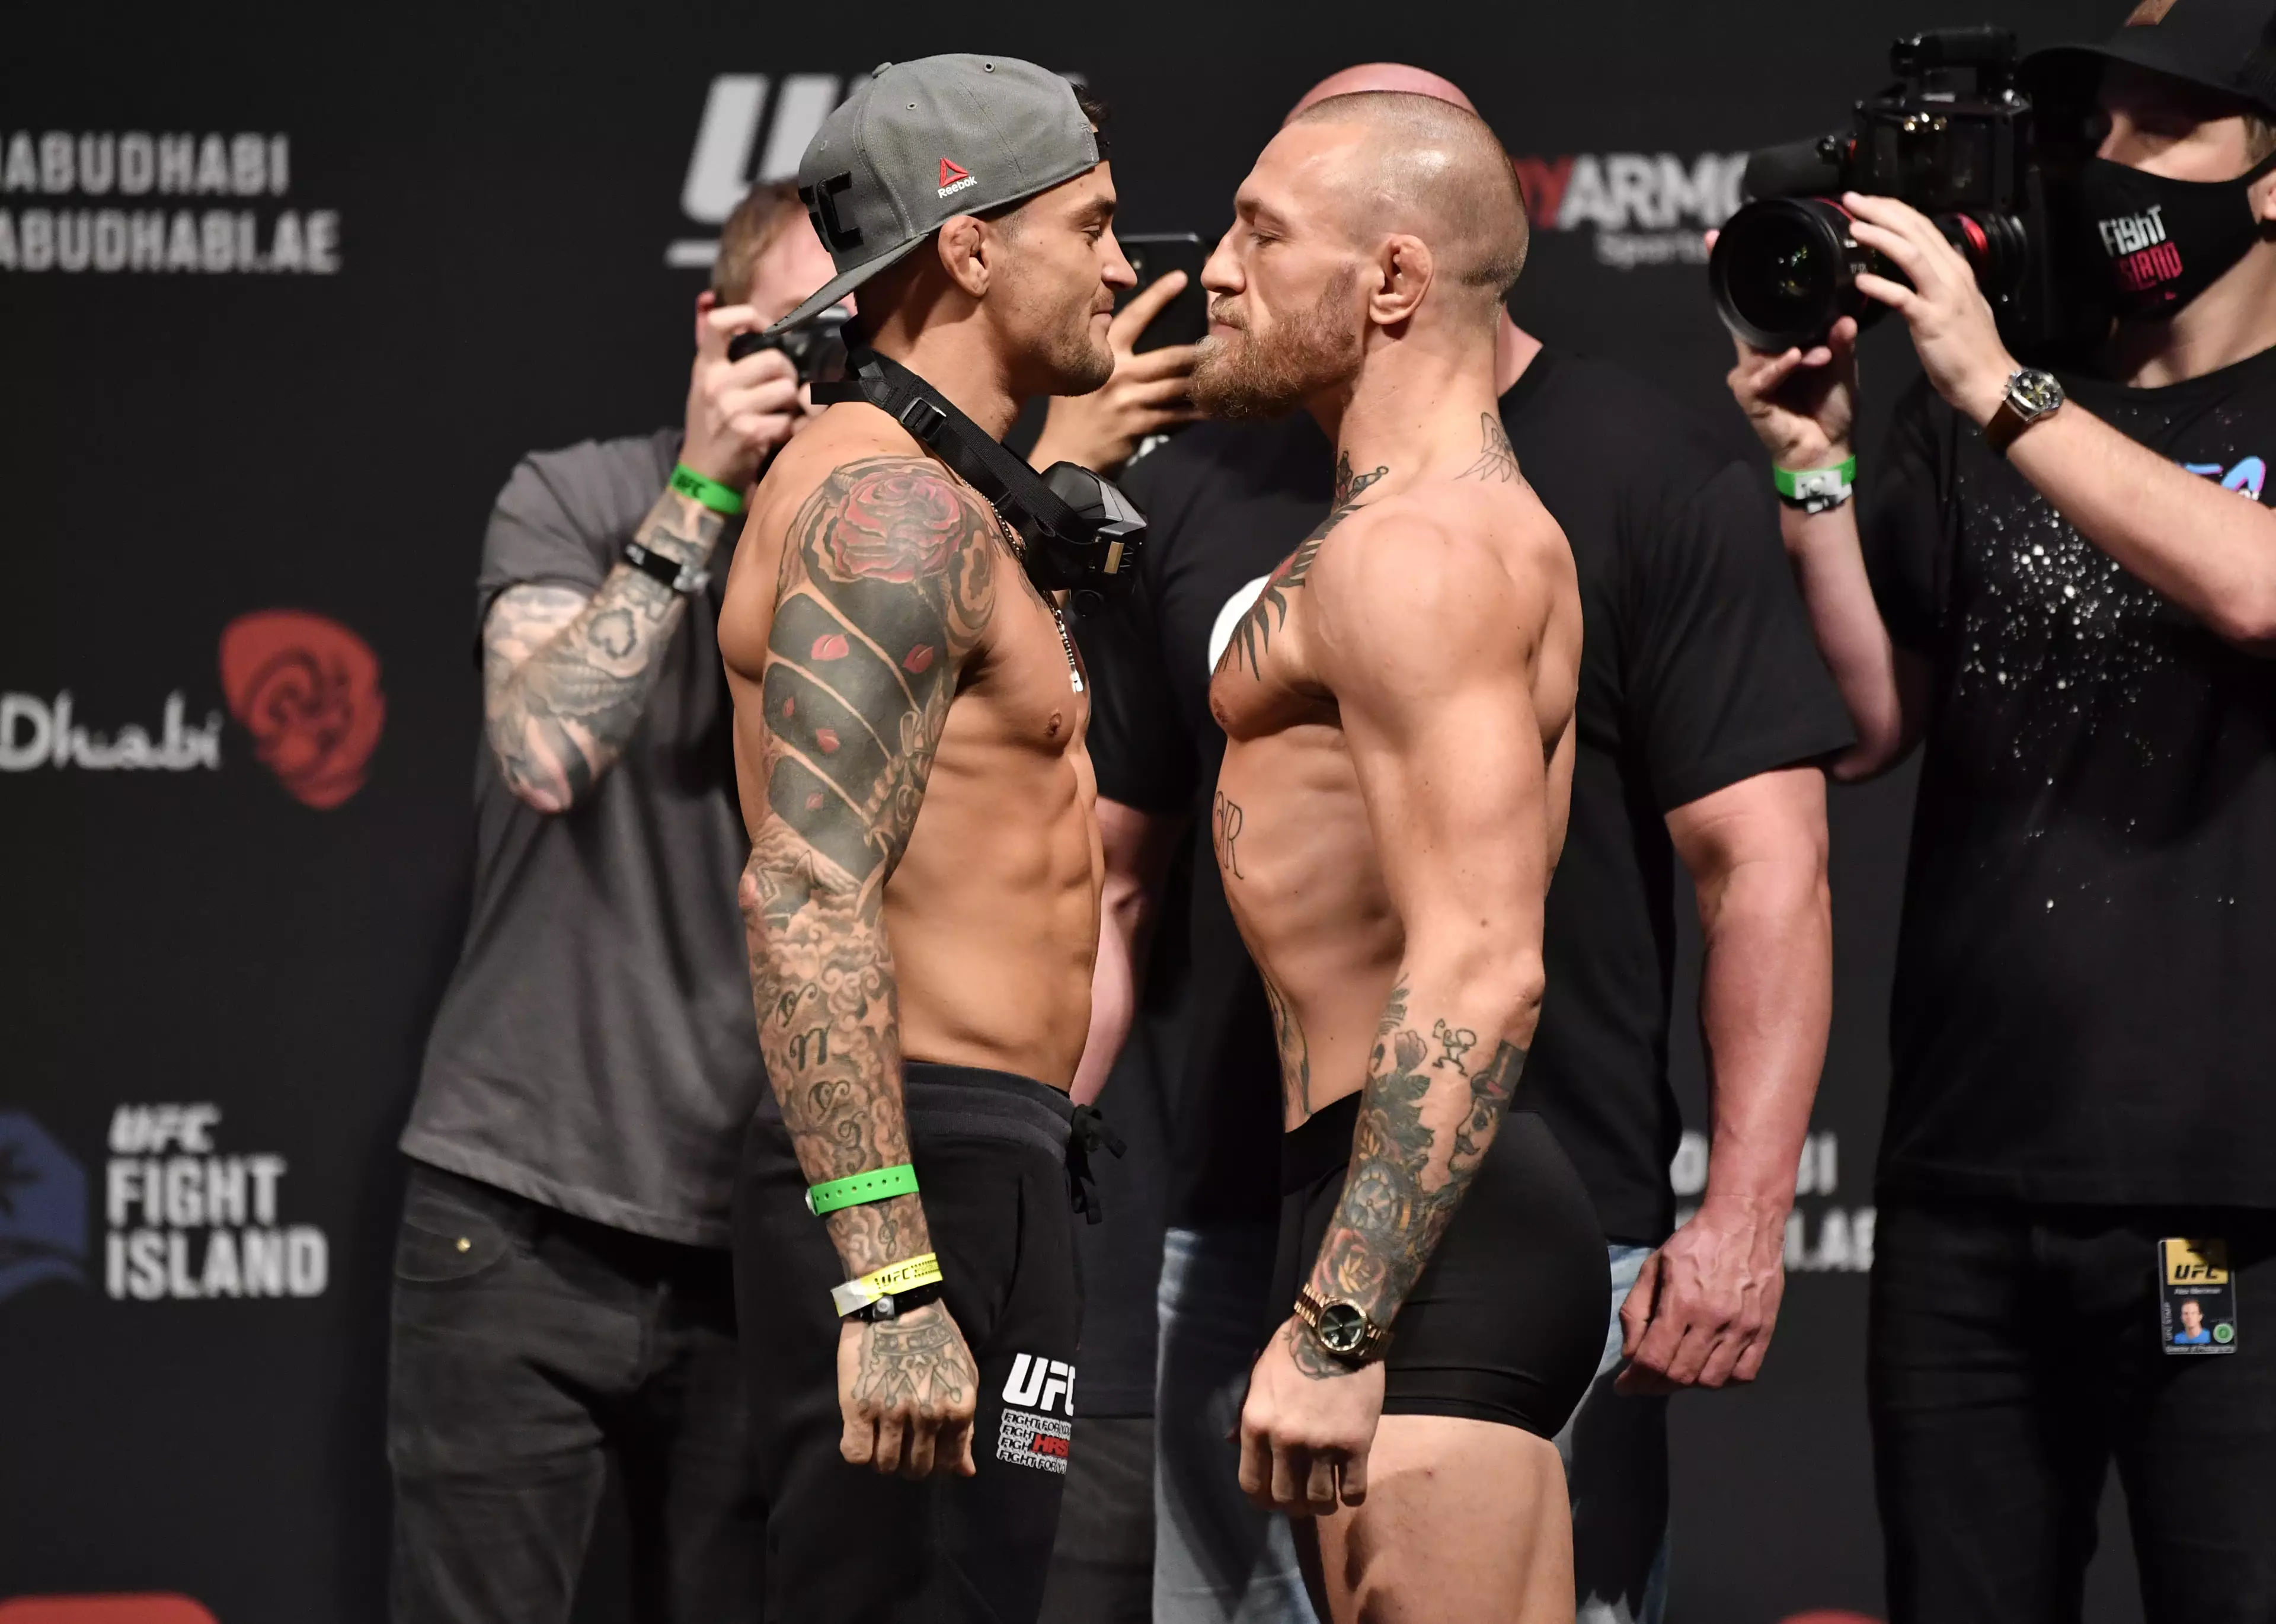 McGregor vs Poirier attracted loads of interest. Image: PA Images